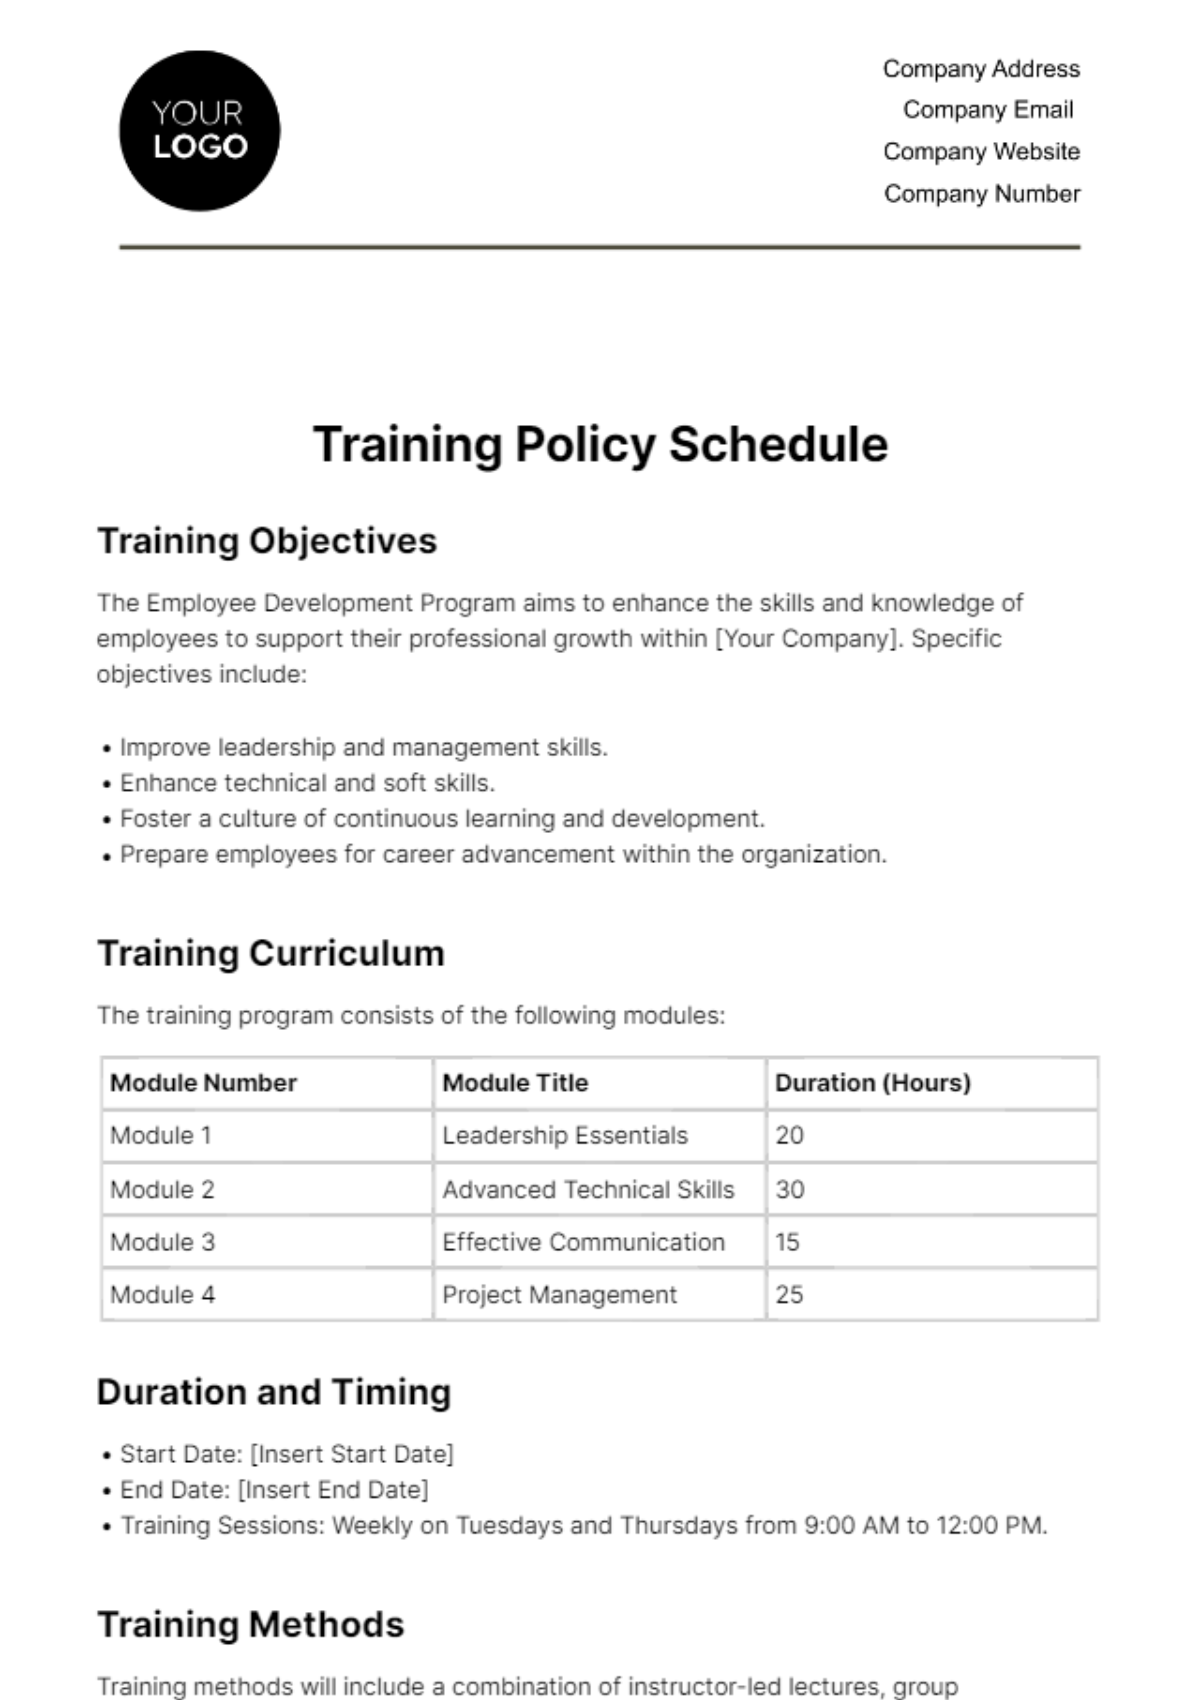 Free Training Policy Schedule HR Template